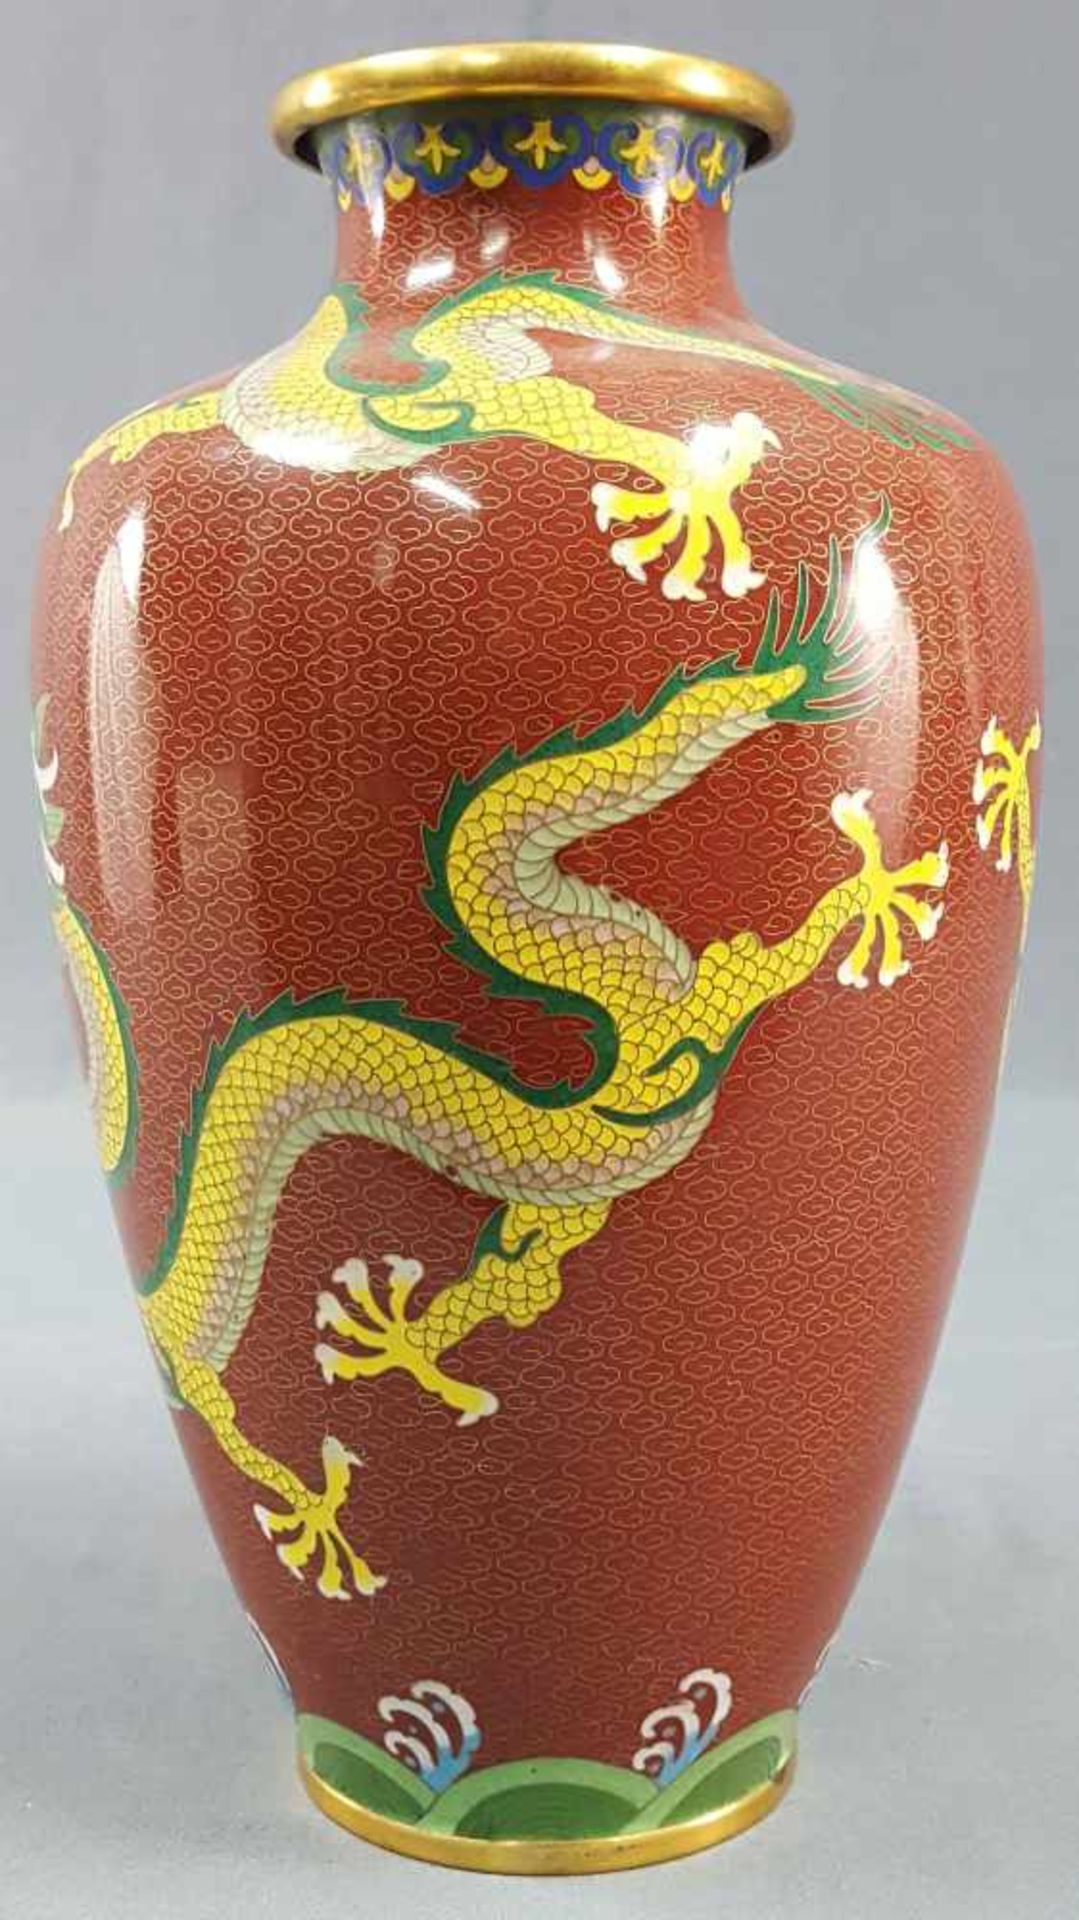 Cloisonne vase with imperial yellow dragon. - Image 3 of 6